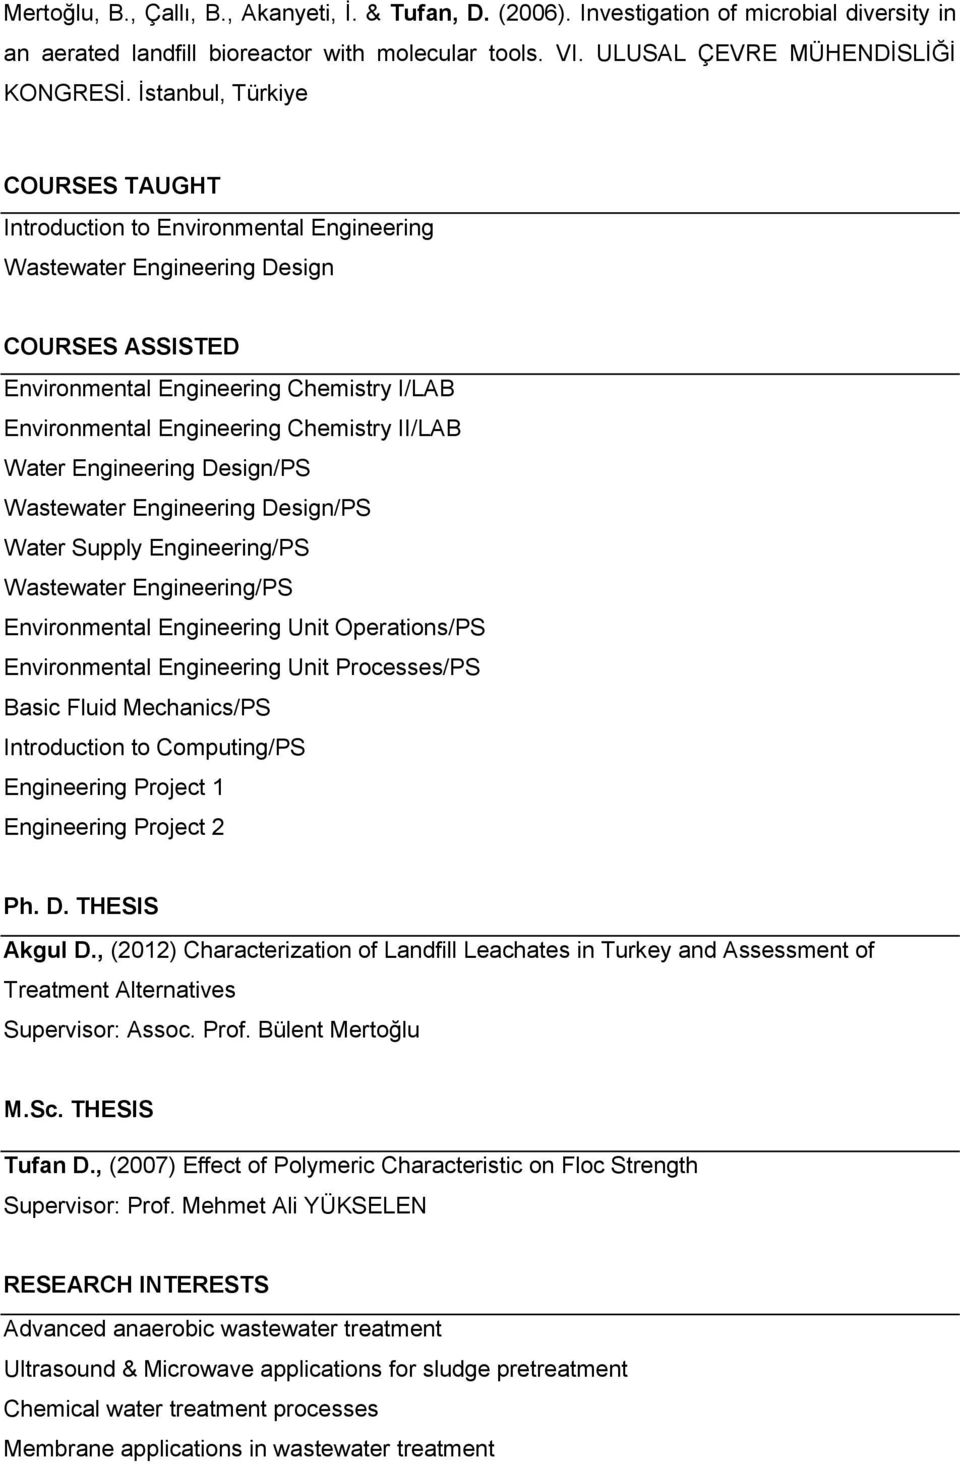 Supply Engineering/PS Wastewater Engineering/PS Unit Operations/PS Unit Processes/PS Basic Fluid Mechanics/PS Introduction to Computing/PS Engineering Project 1 Engineering Project 2 Ph. D.